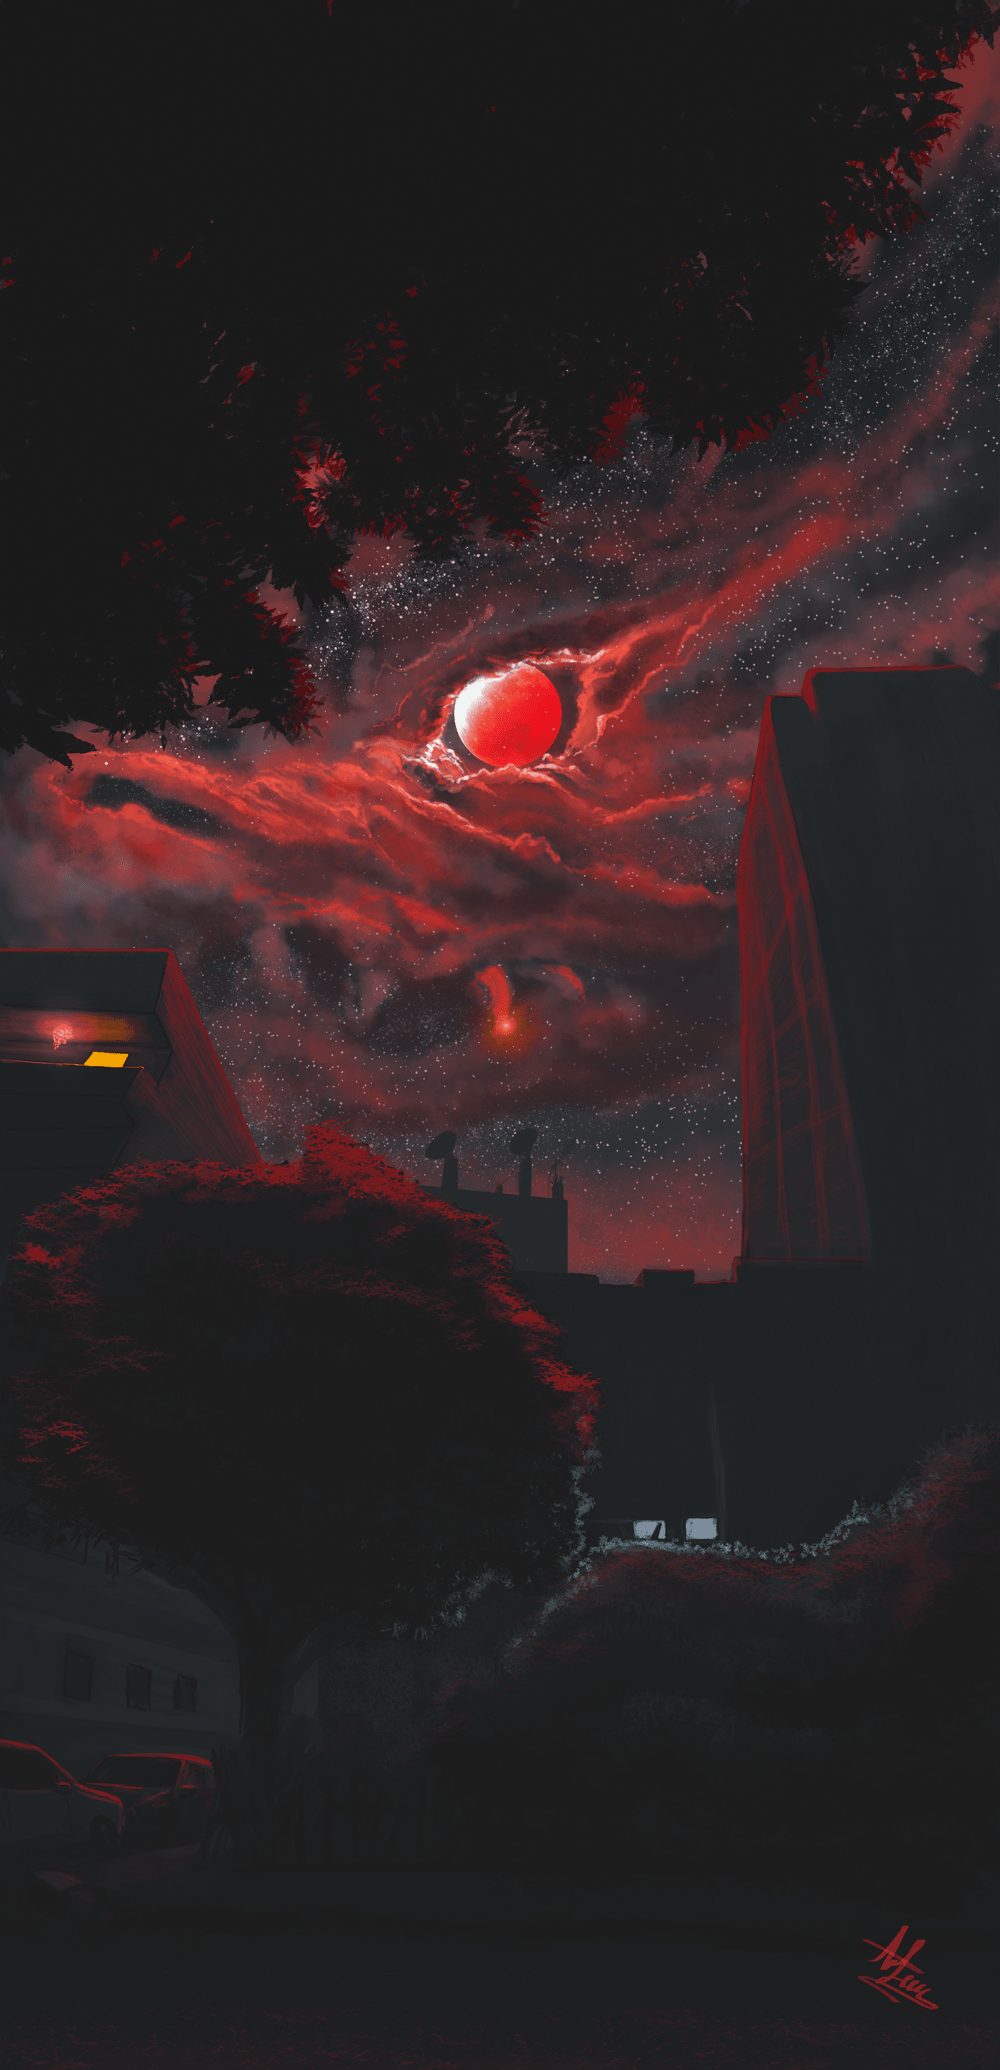 A red moon shines over a dark city - Blood